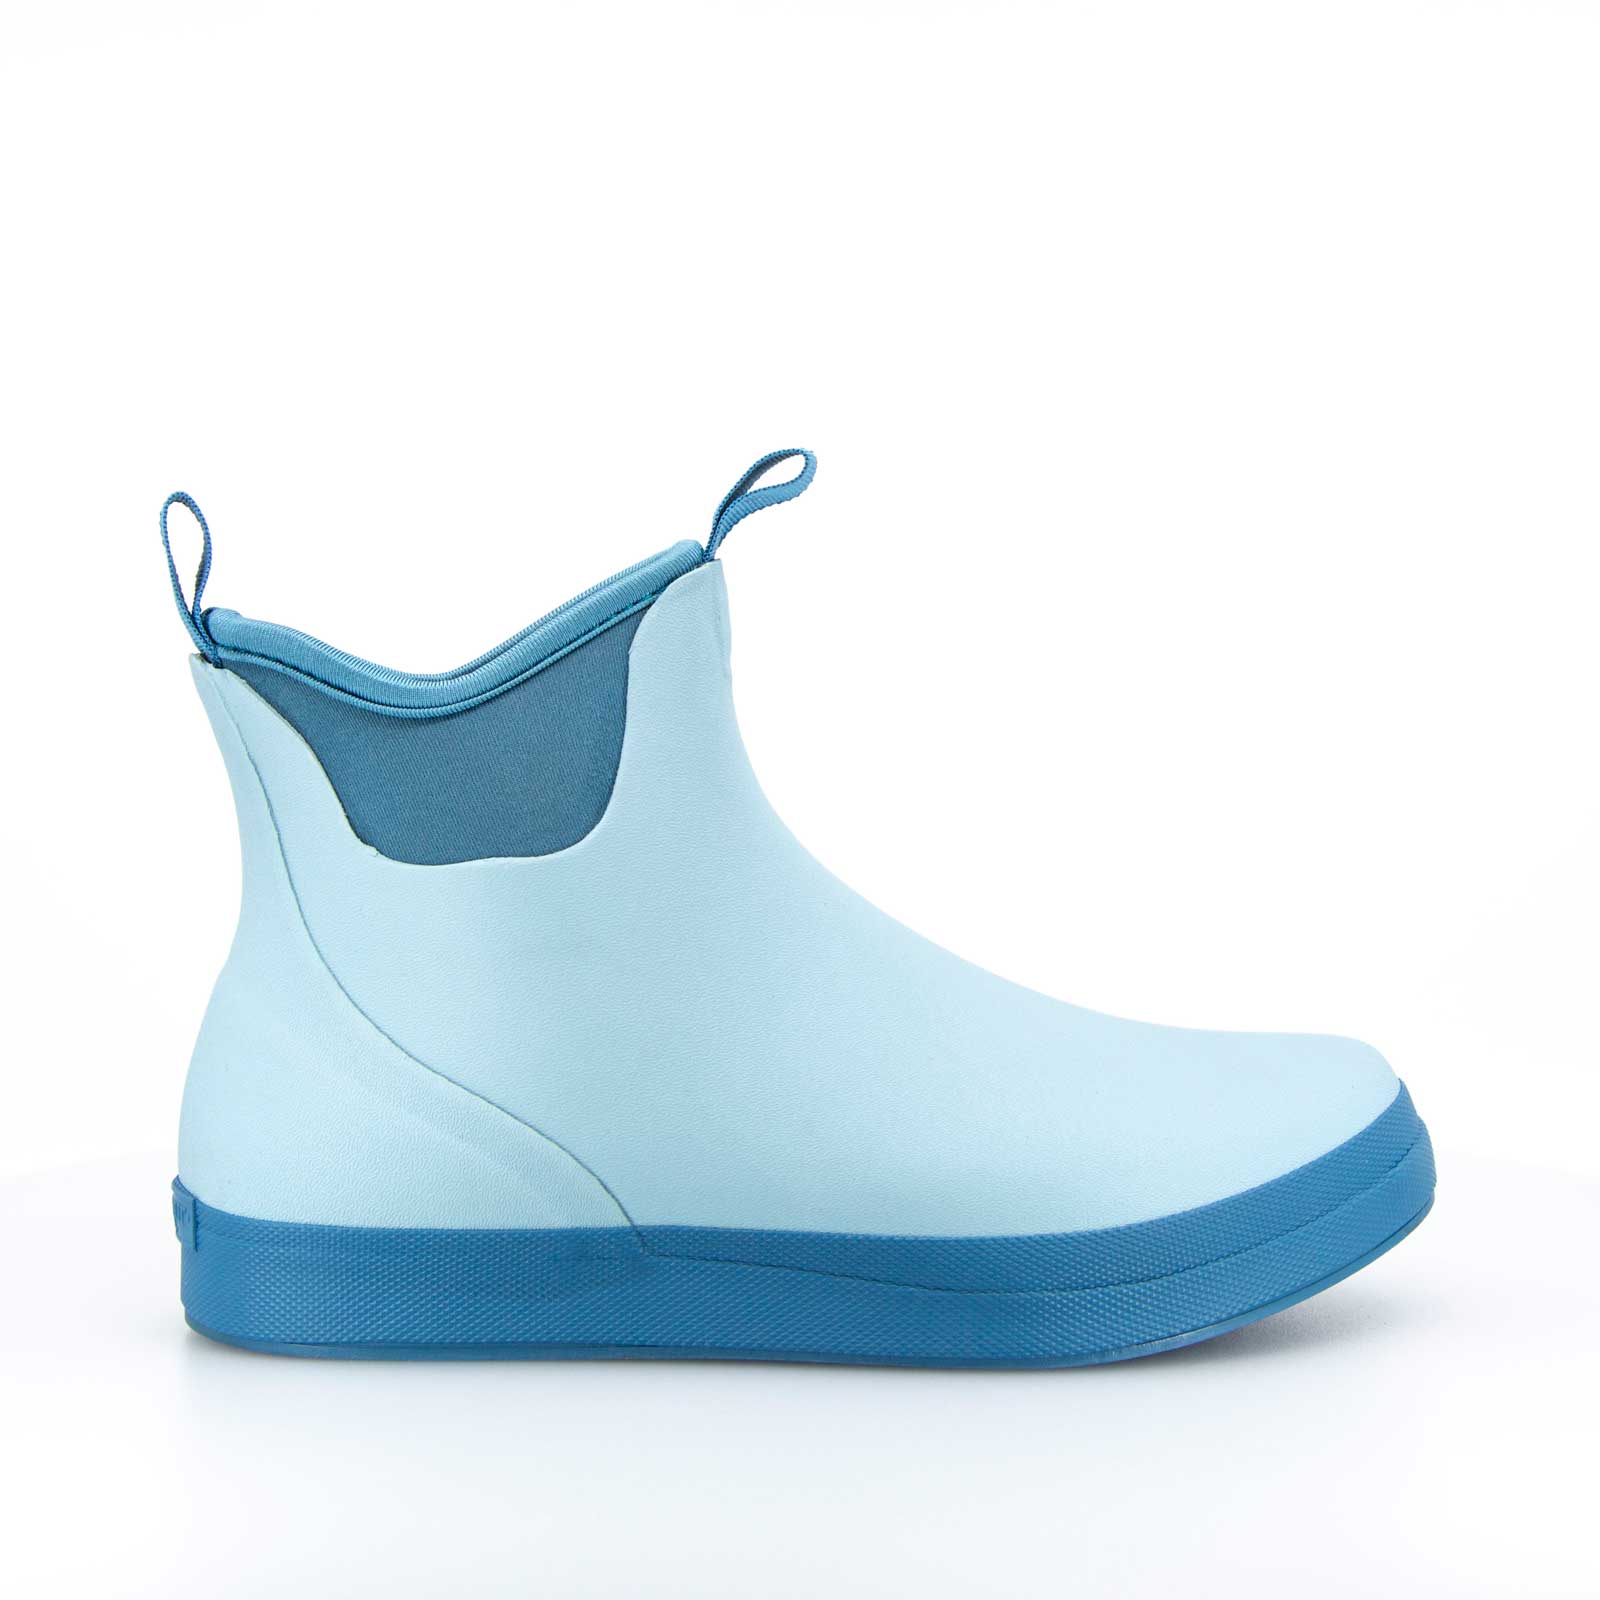 Home / All Products Available From Wellies Online / CyanWave Neoprene ...